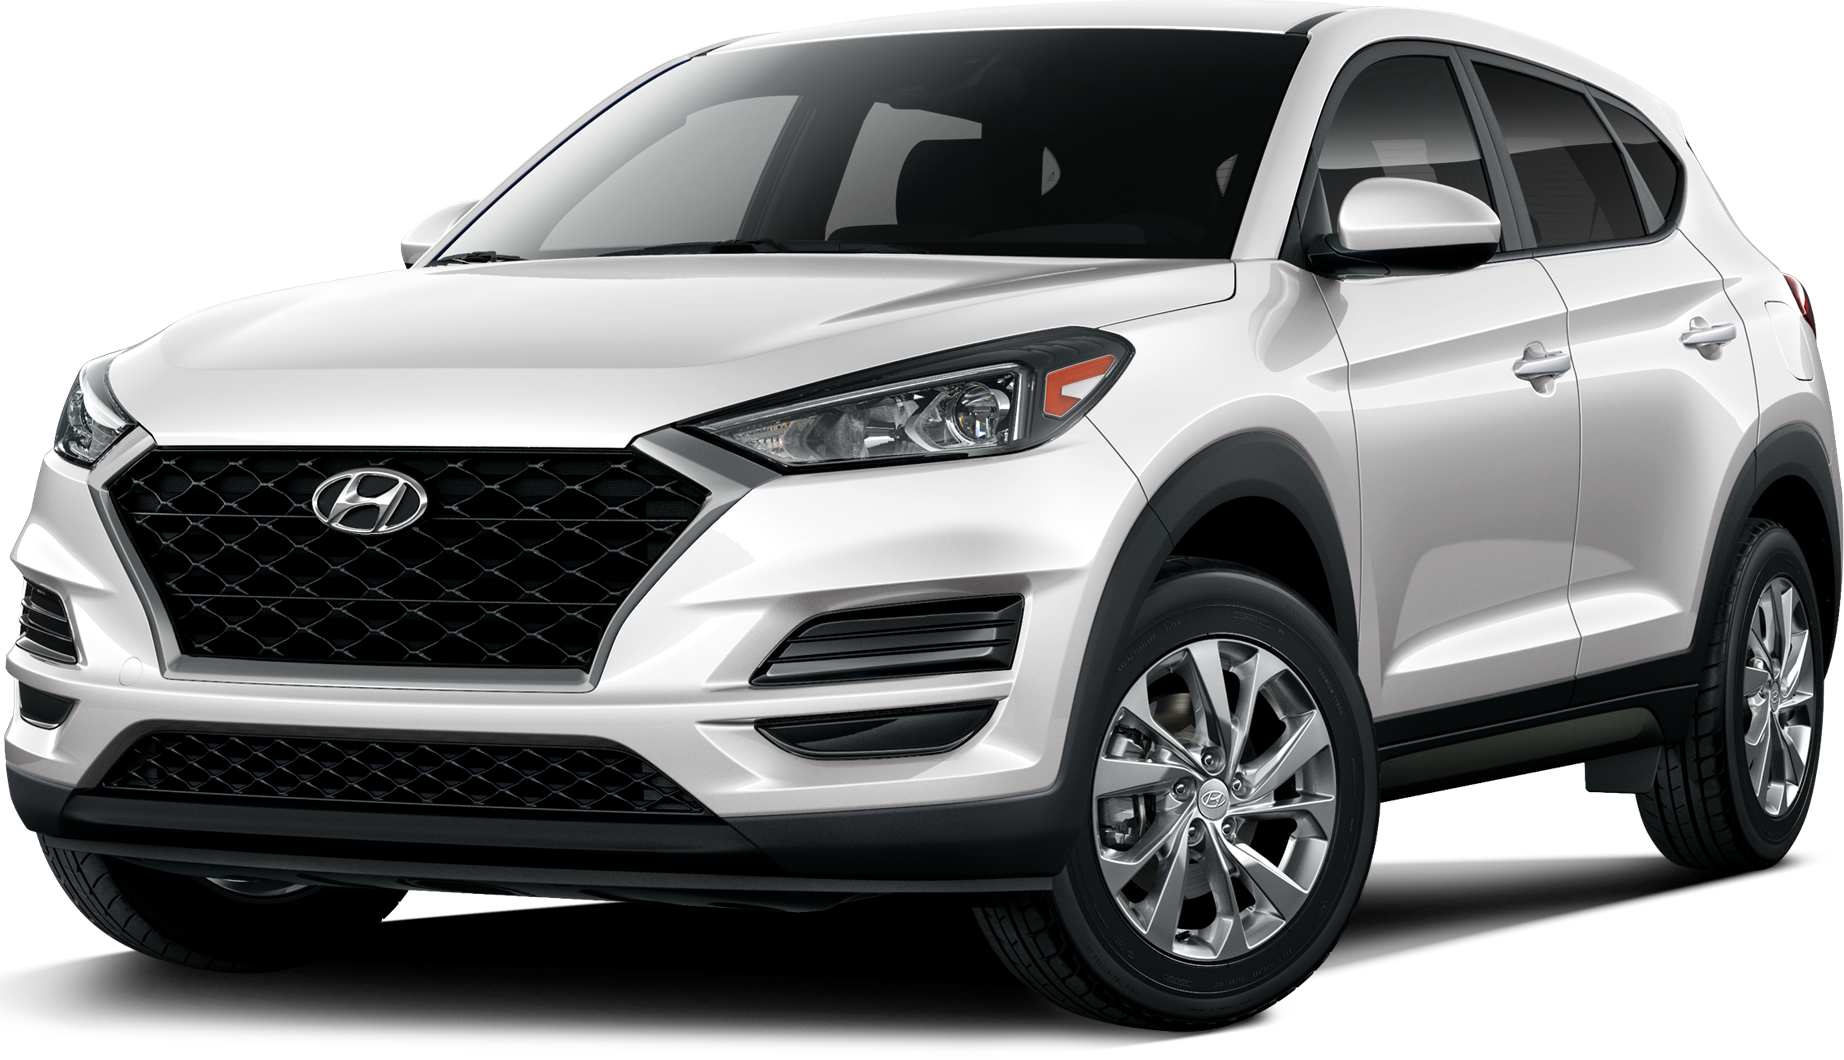 2020 Hyundai Tucson Incentives, Specials & Offers in Mission Hills CA